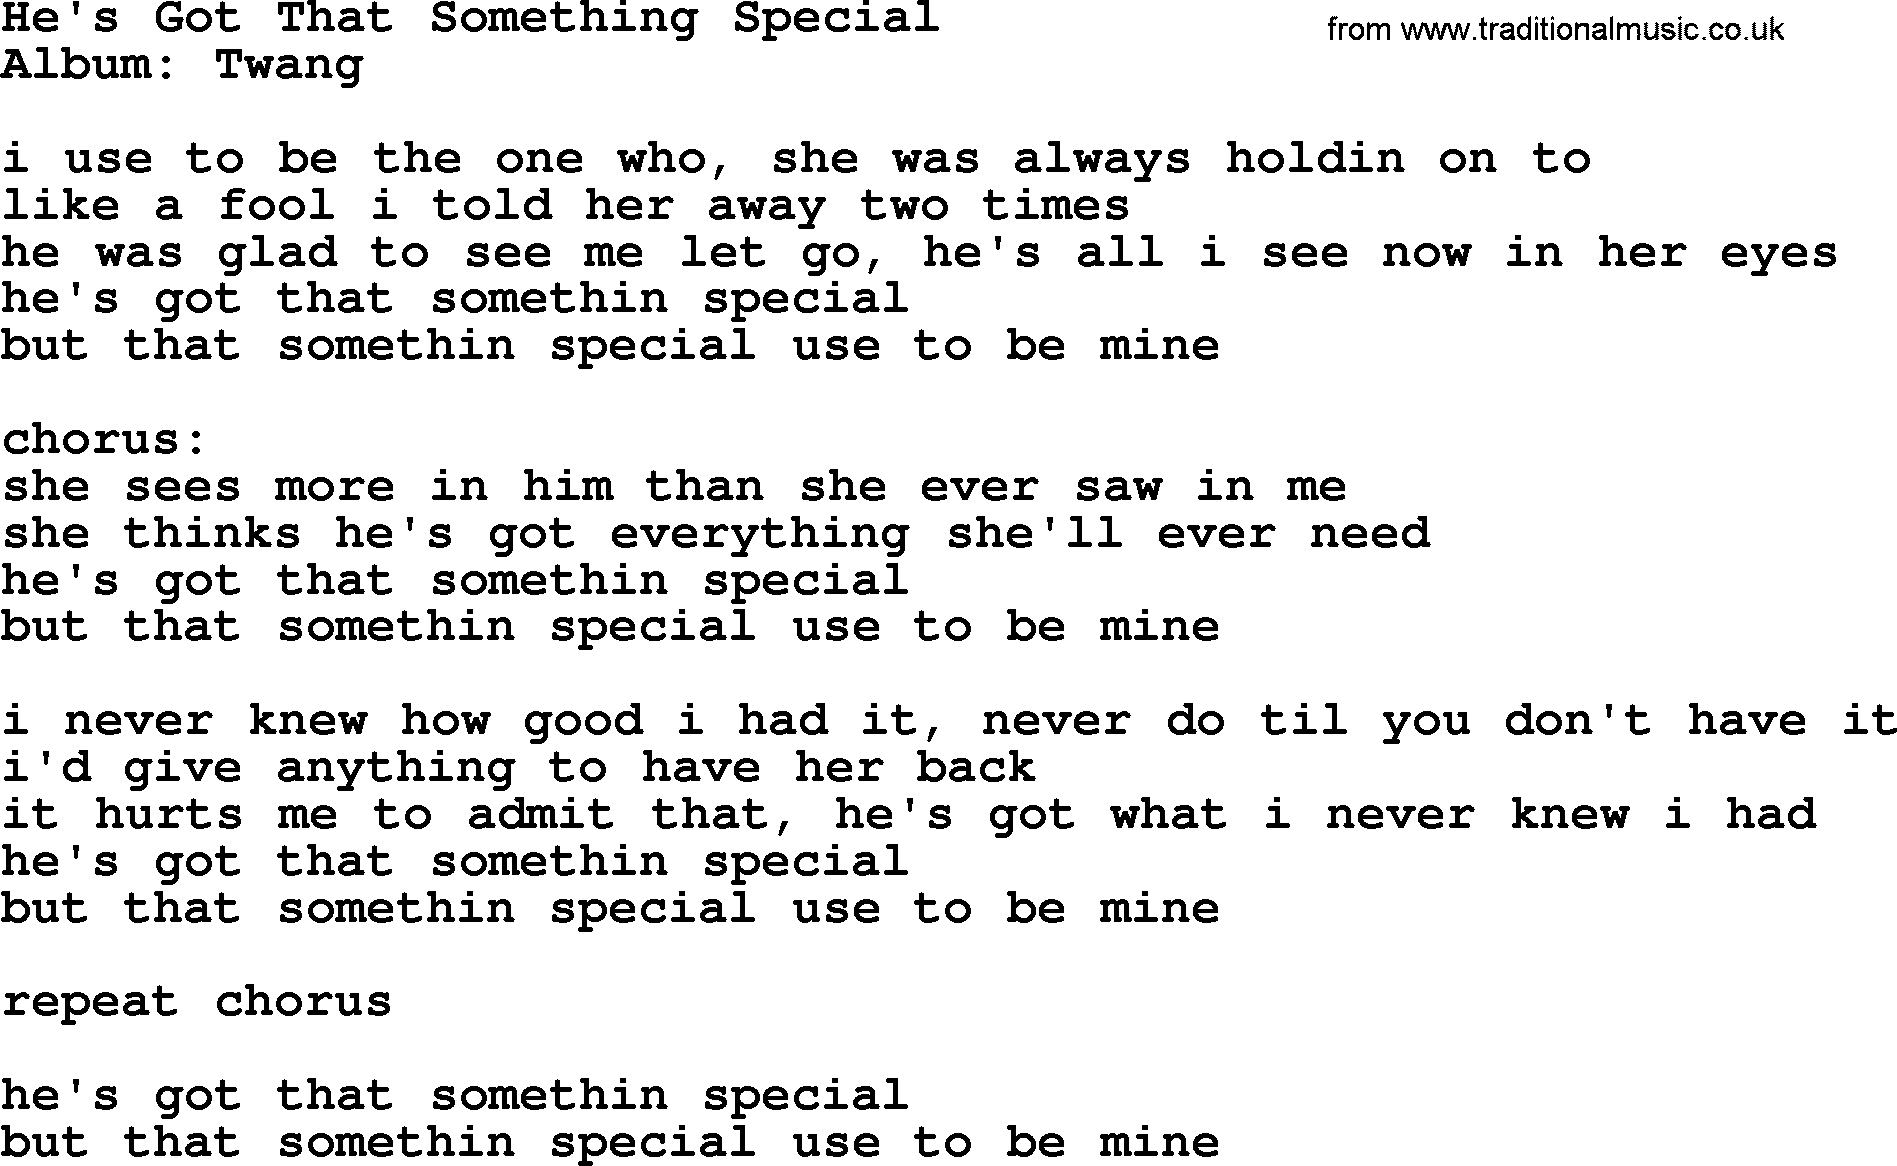 George Strait song: He's Got That Something Special, lyrics